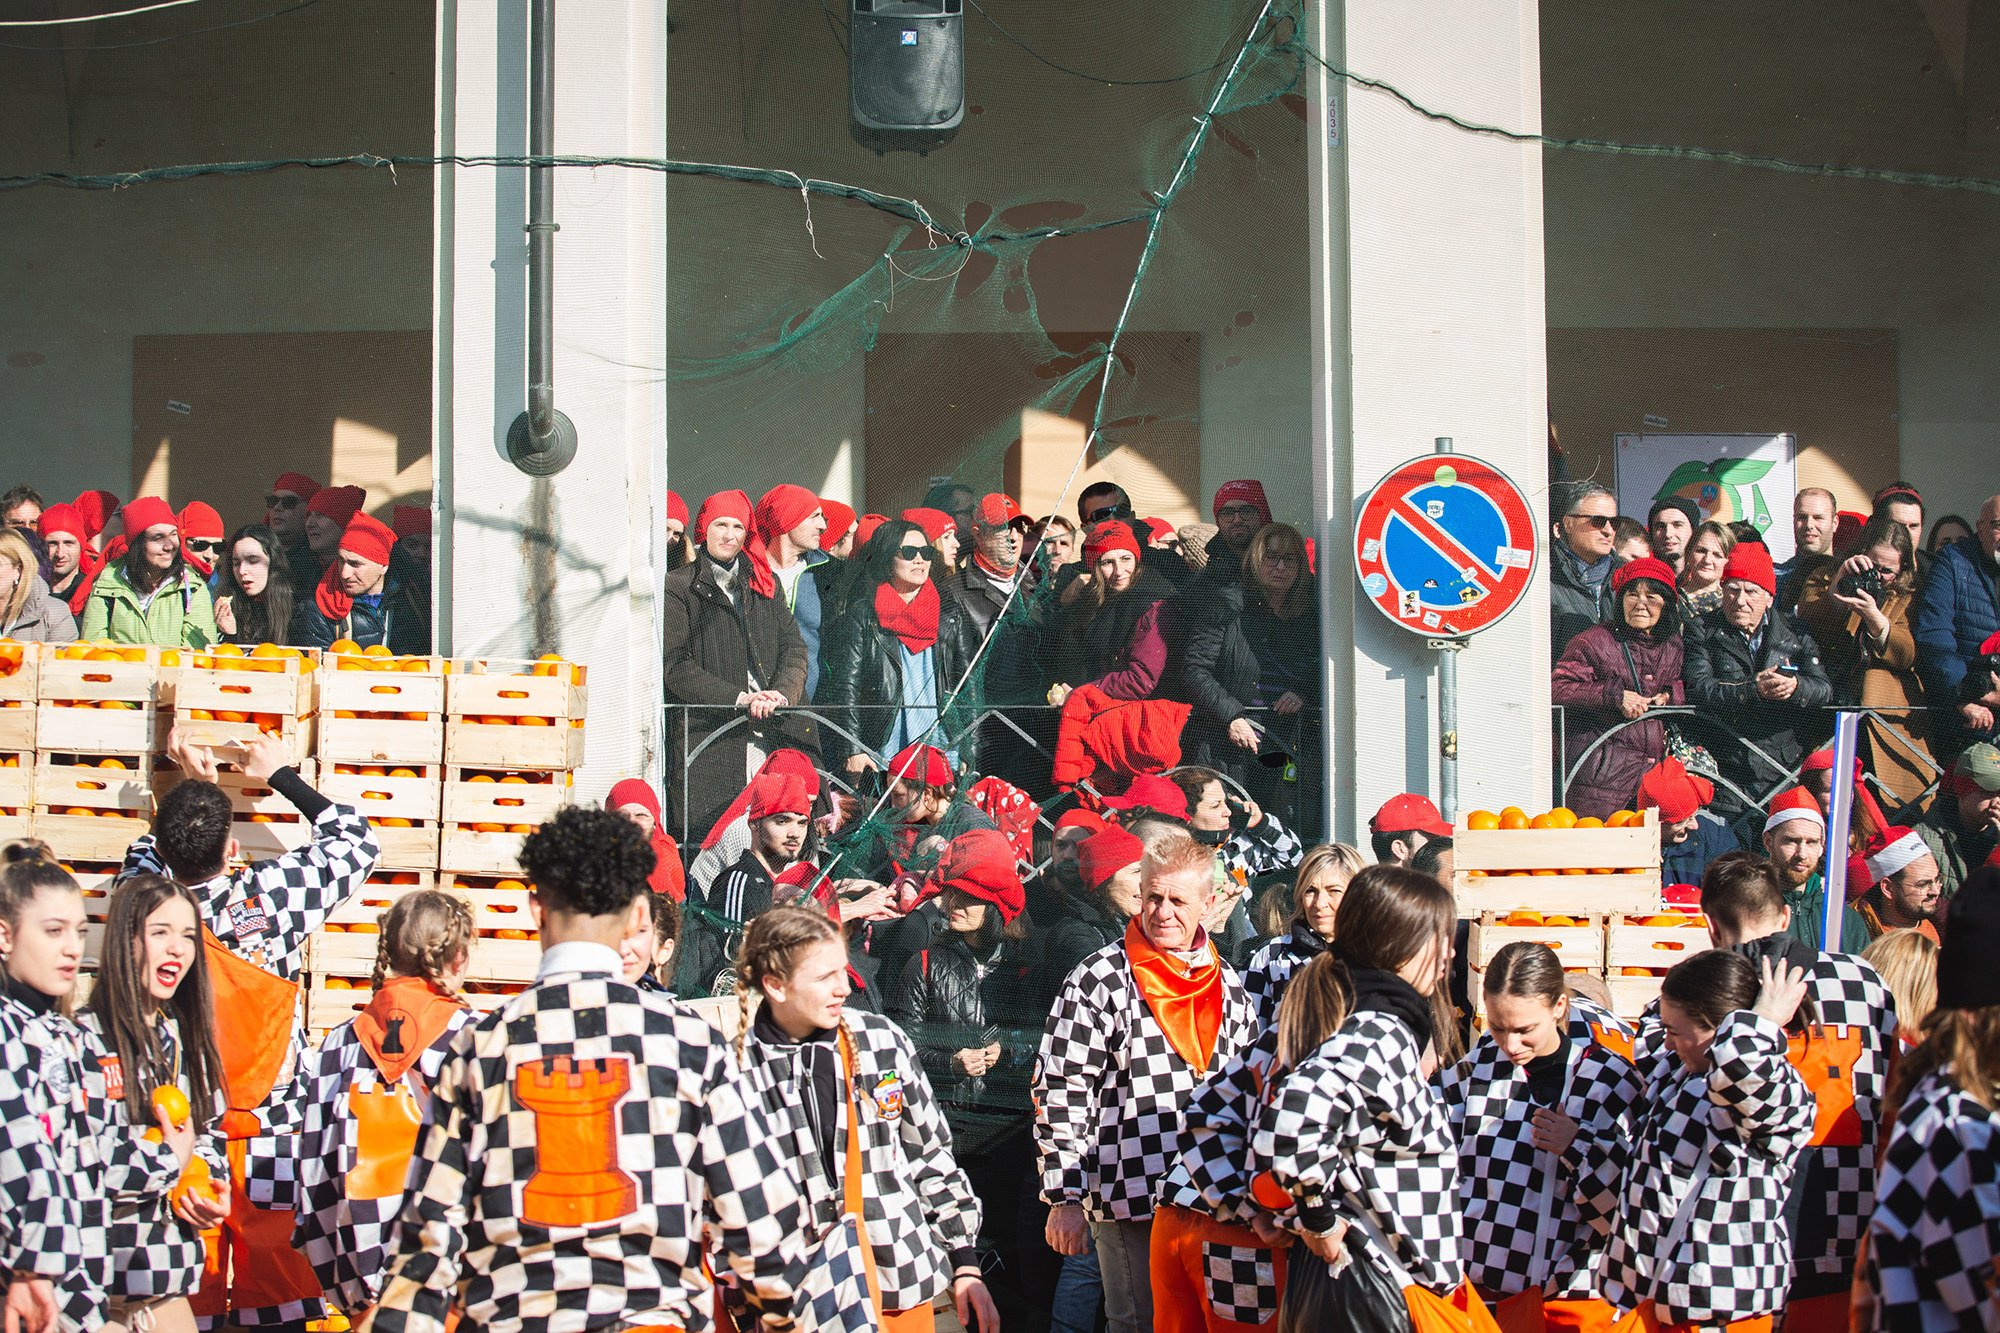 People wear checkered shirts with the rook chess piece on the backs, standing near crates of oranges while people in the background wear red beanies, standing behind a very tall net